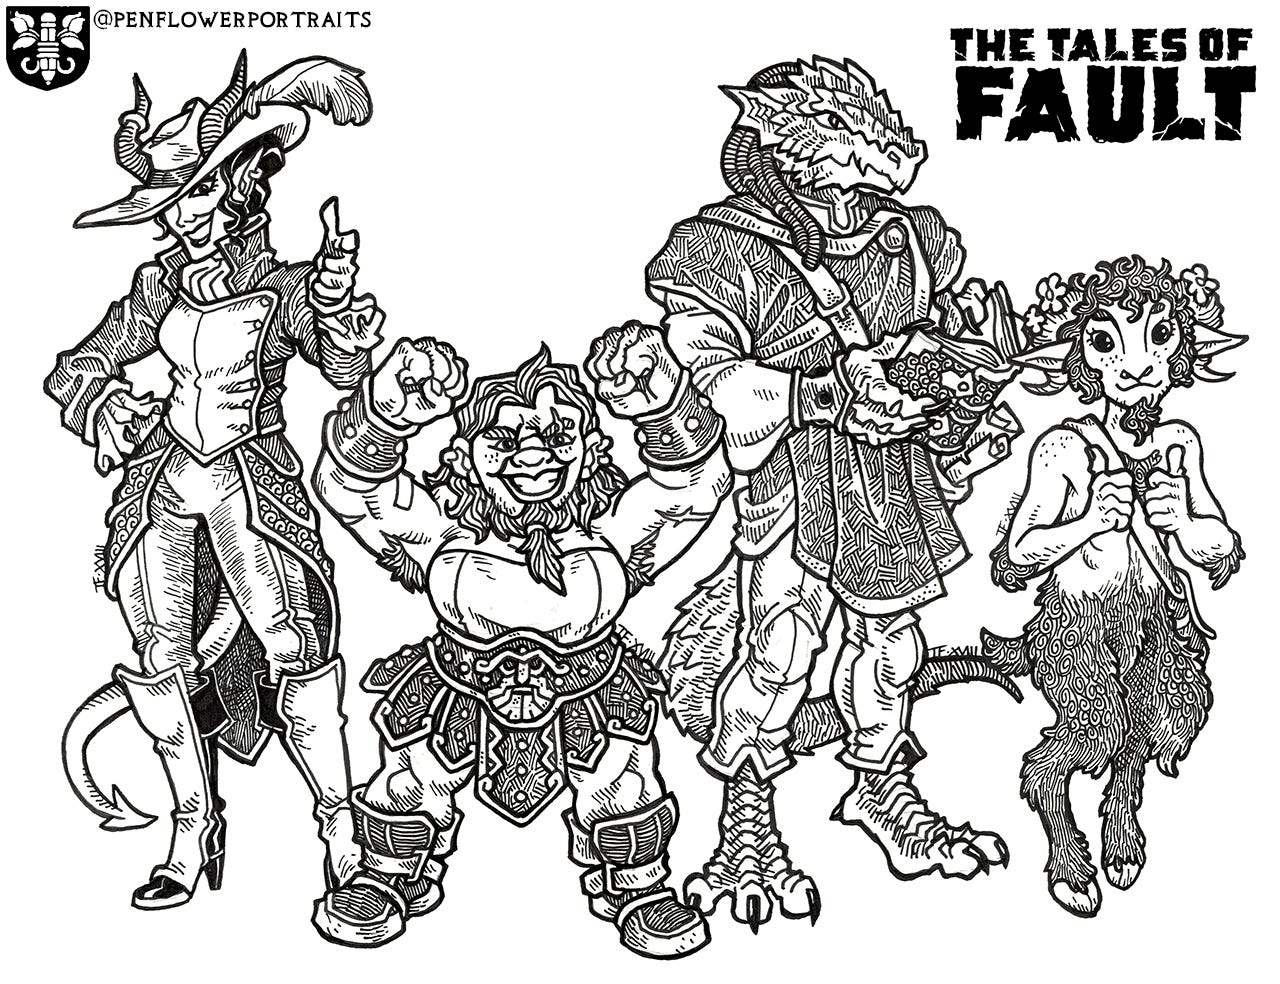 Traditionally hand-drawn black and white composite illustration of four D&D characters. From left to right: a tiefling ranger wearing fine clothes and a feathered hat; a muscular dwarf woman with several battle scars; an erudite dragonborn scholar, perusing a book; an innocent-looking young satyr, with flowers in his curly hair. Text reads: The Tales of Fault.